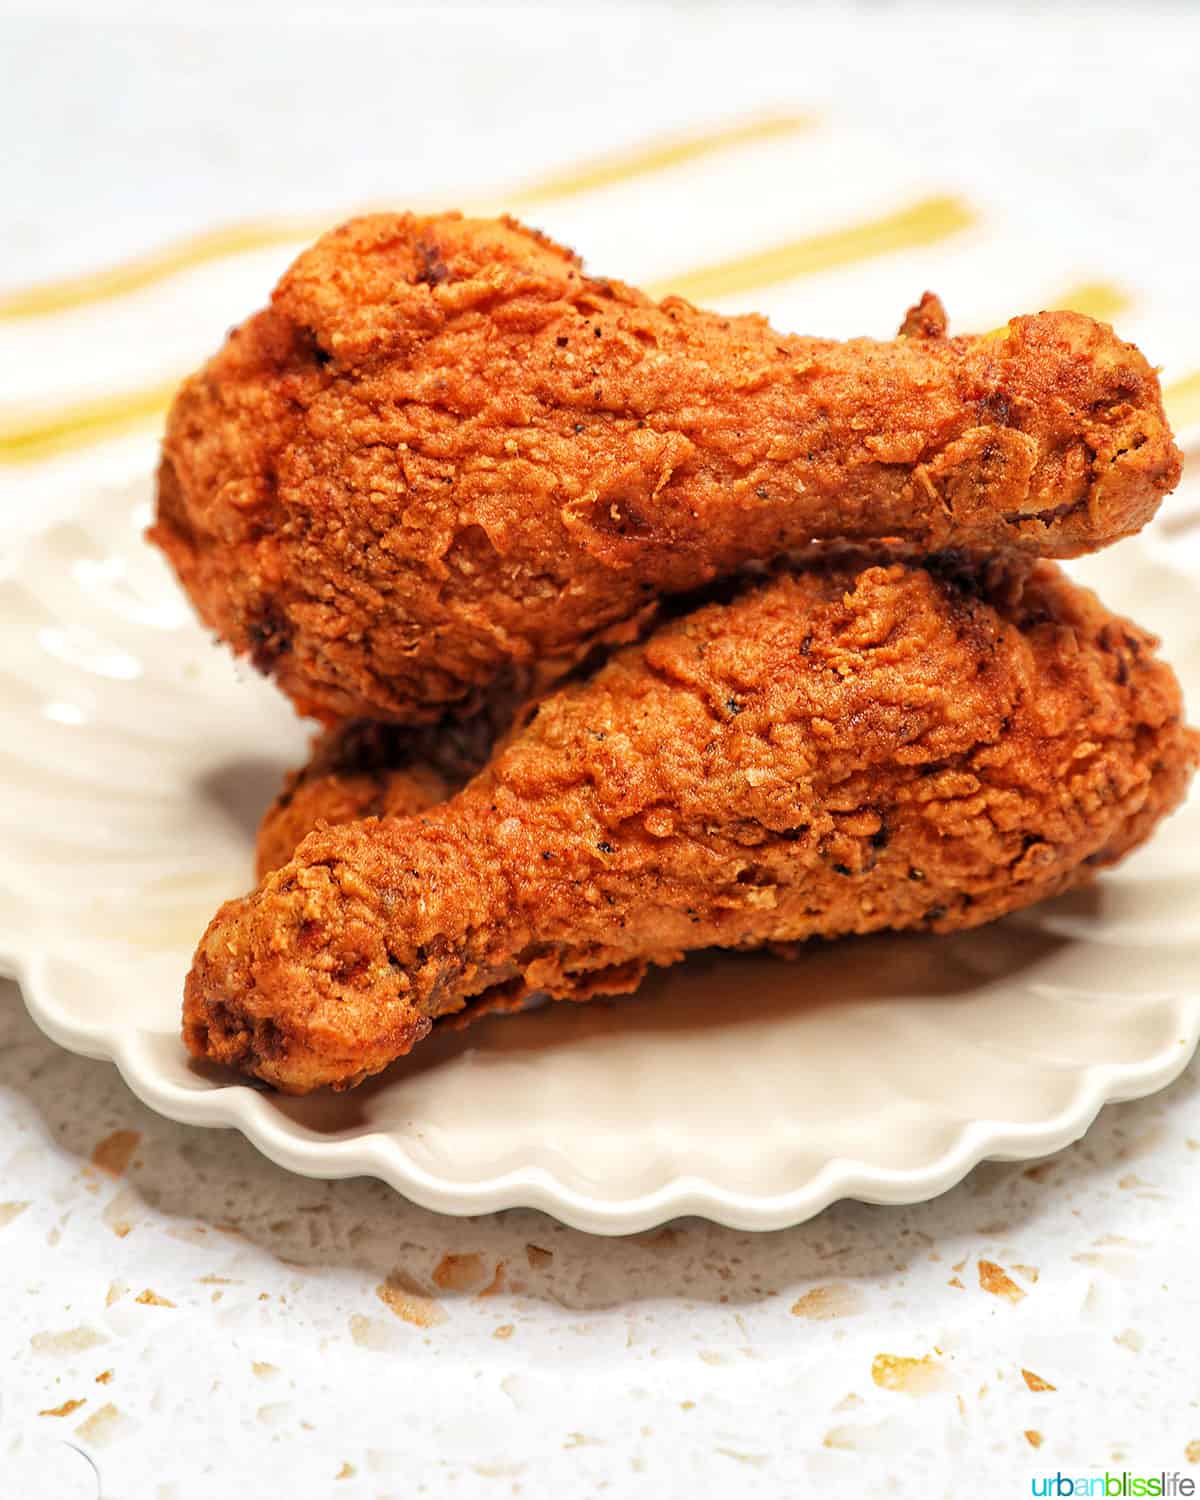 two fried chicken drumsticks stacked on a scalloped plate.